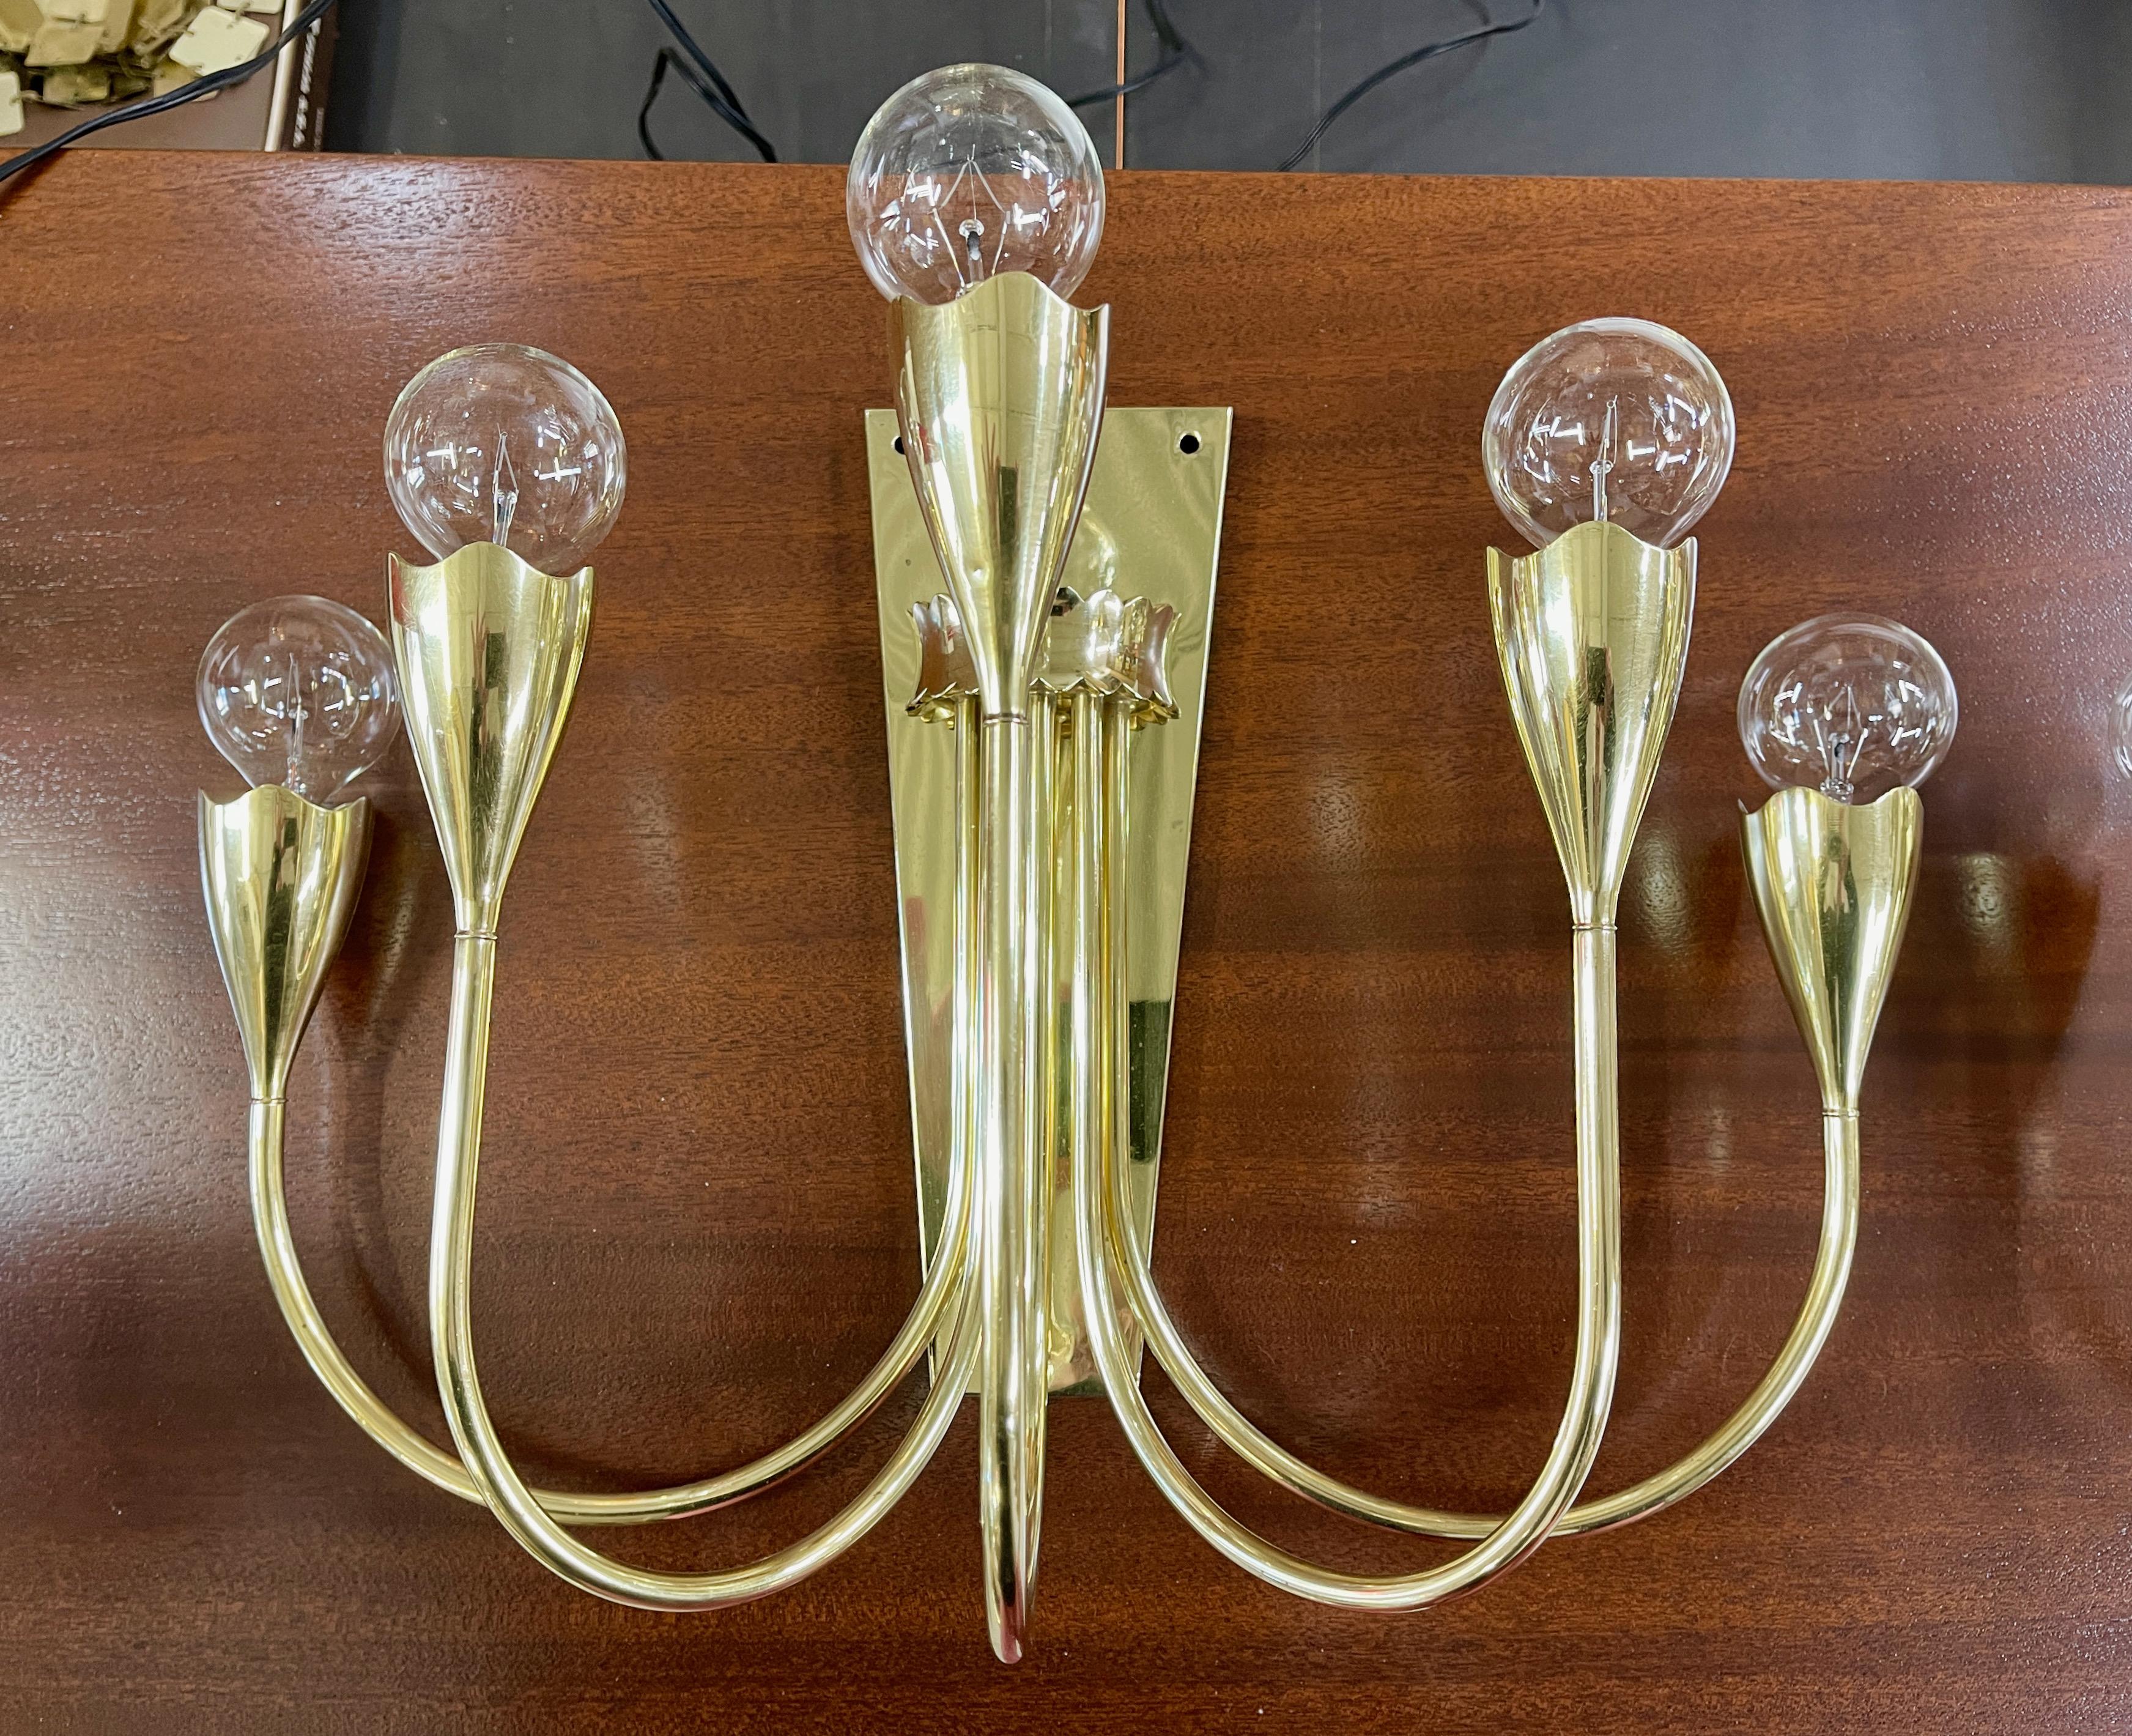 Impressive pair of 1950's artisan made Italian solid brass 5 arm candelabra sconces with lovely organic scalloped edge cups, like the bulb heads of a tulip, similar to the Model 77 floor lamp by Angelo Lelii for Arredoluce. Unusually skillful